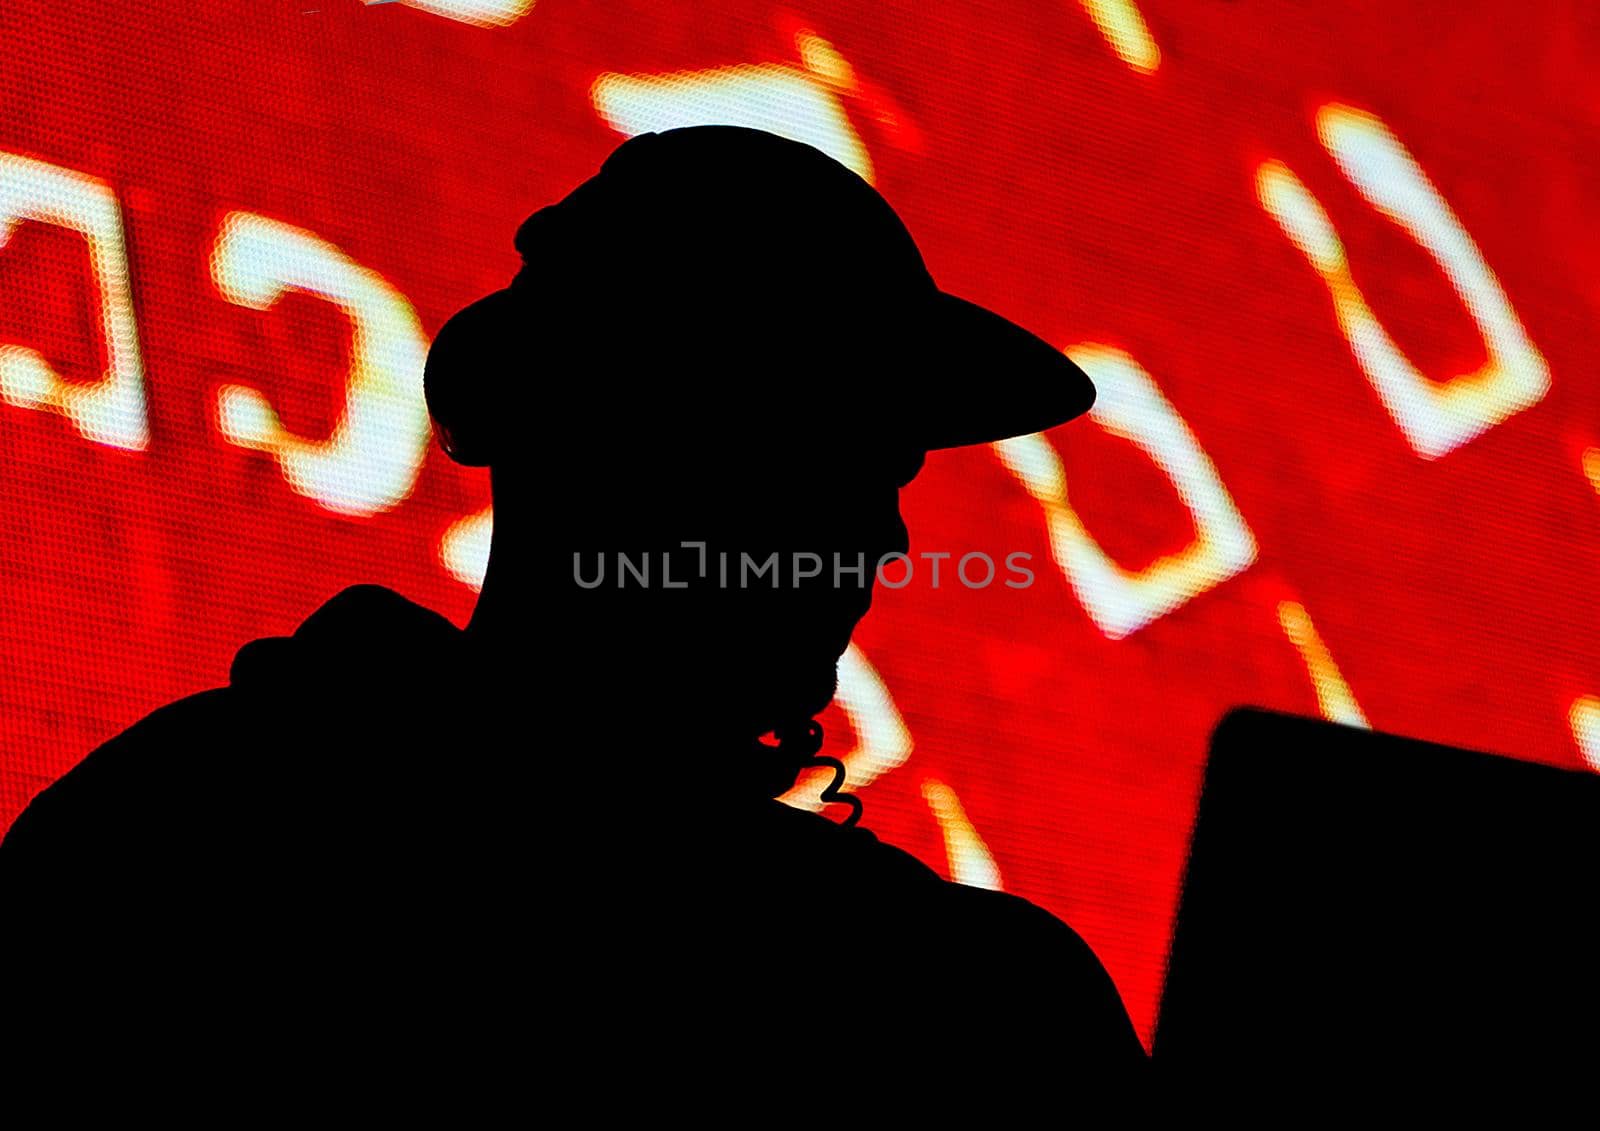 DJ, black silhouette of a man in a cap and headphones on a red background or appeal, propaganda by AYDO8